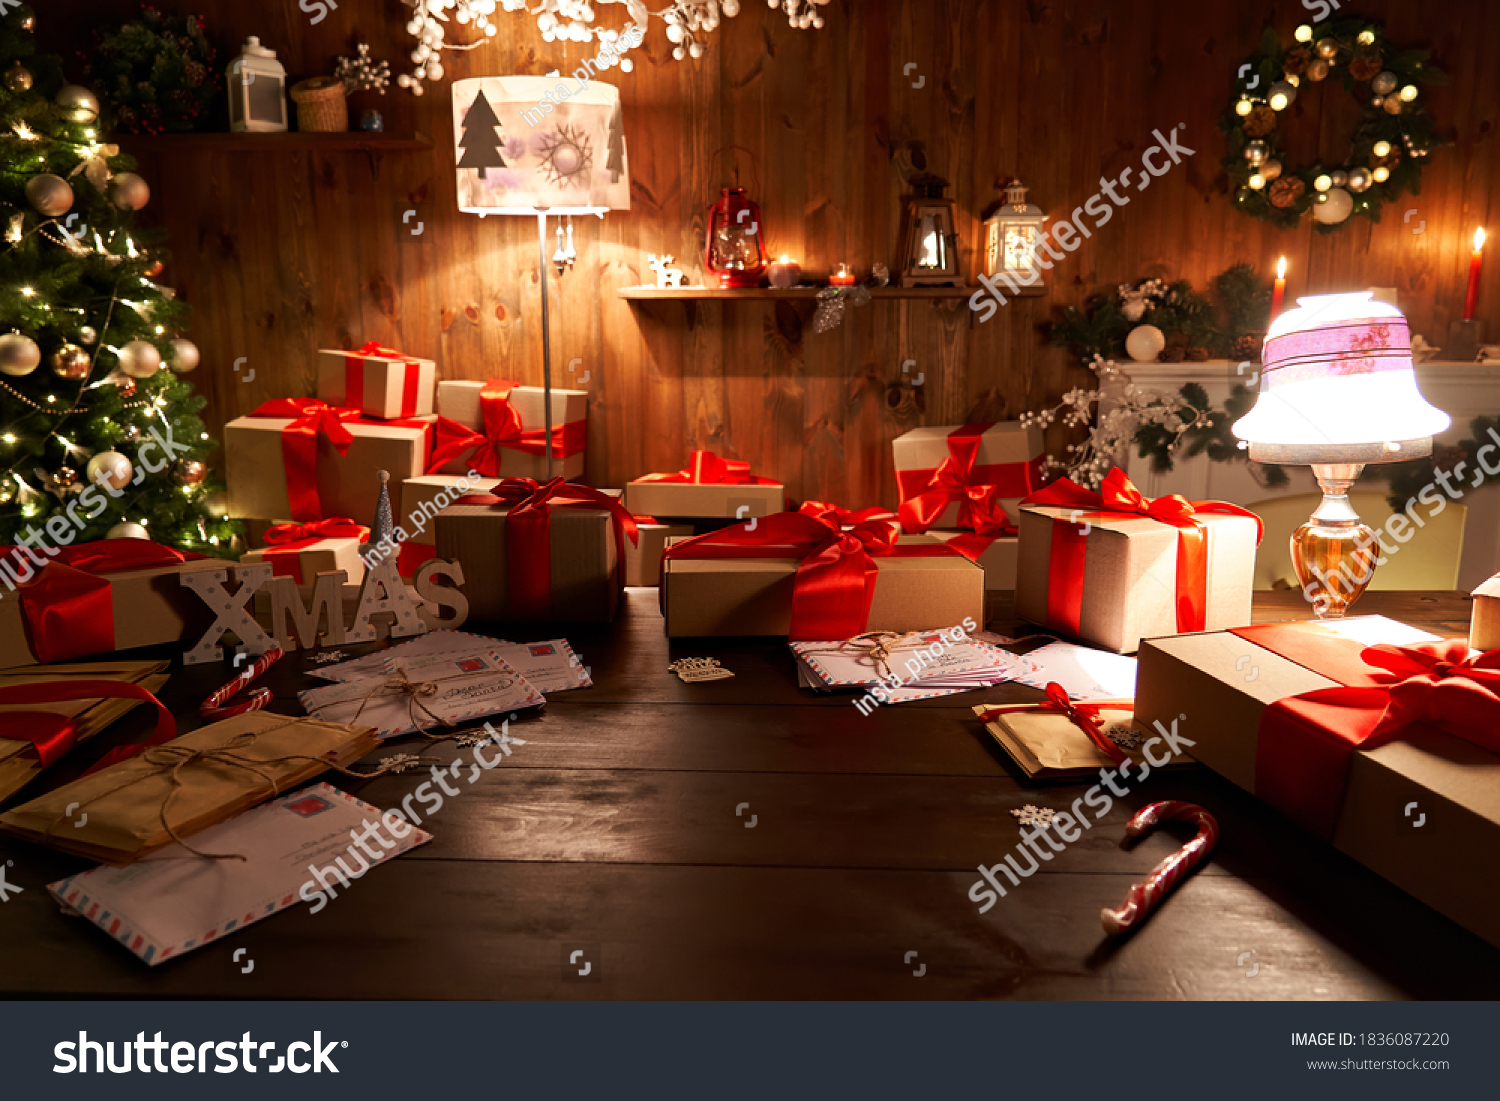 Santa Claus workshop home wooden decorated table with Merry Christmas tree, decor, wrapped gifts presents boxes on holiday eve in cozy home interior late in night with lamp light on xmas background. #1836087220